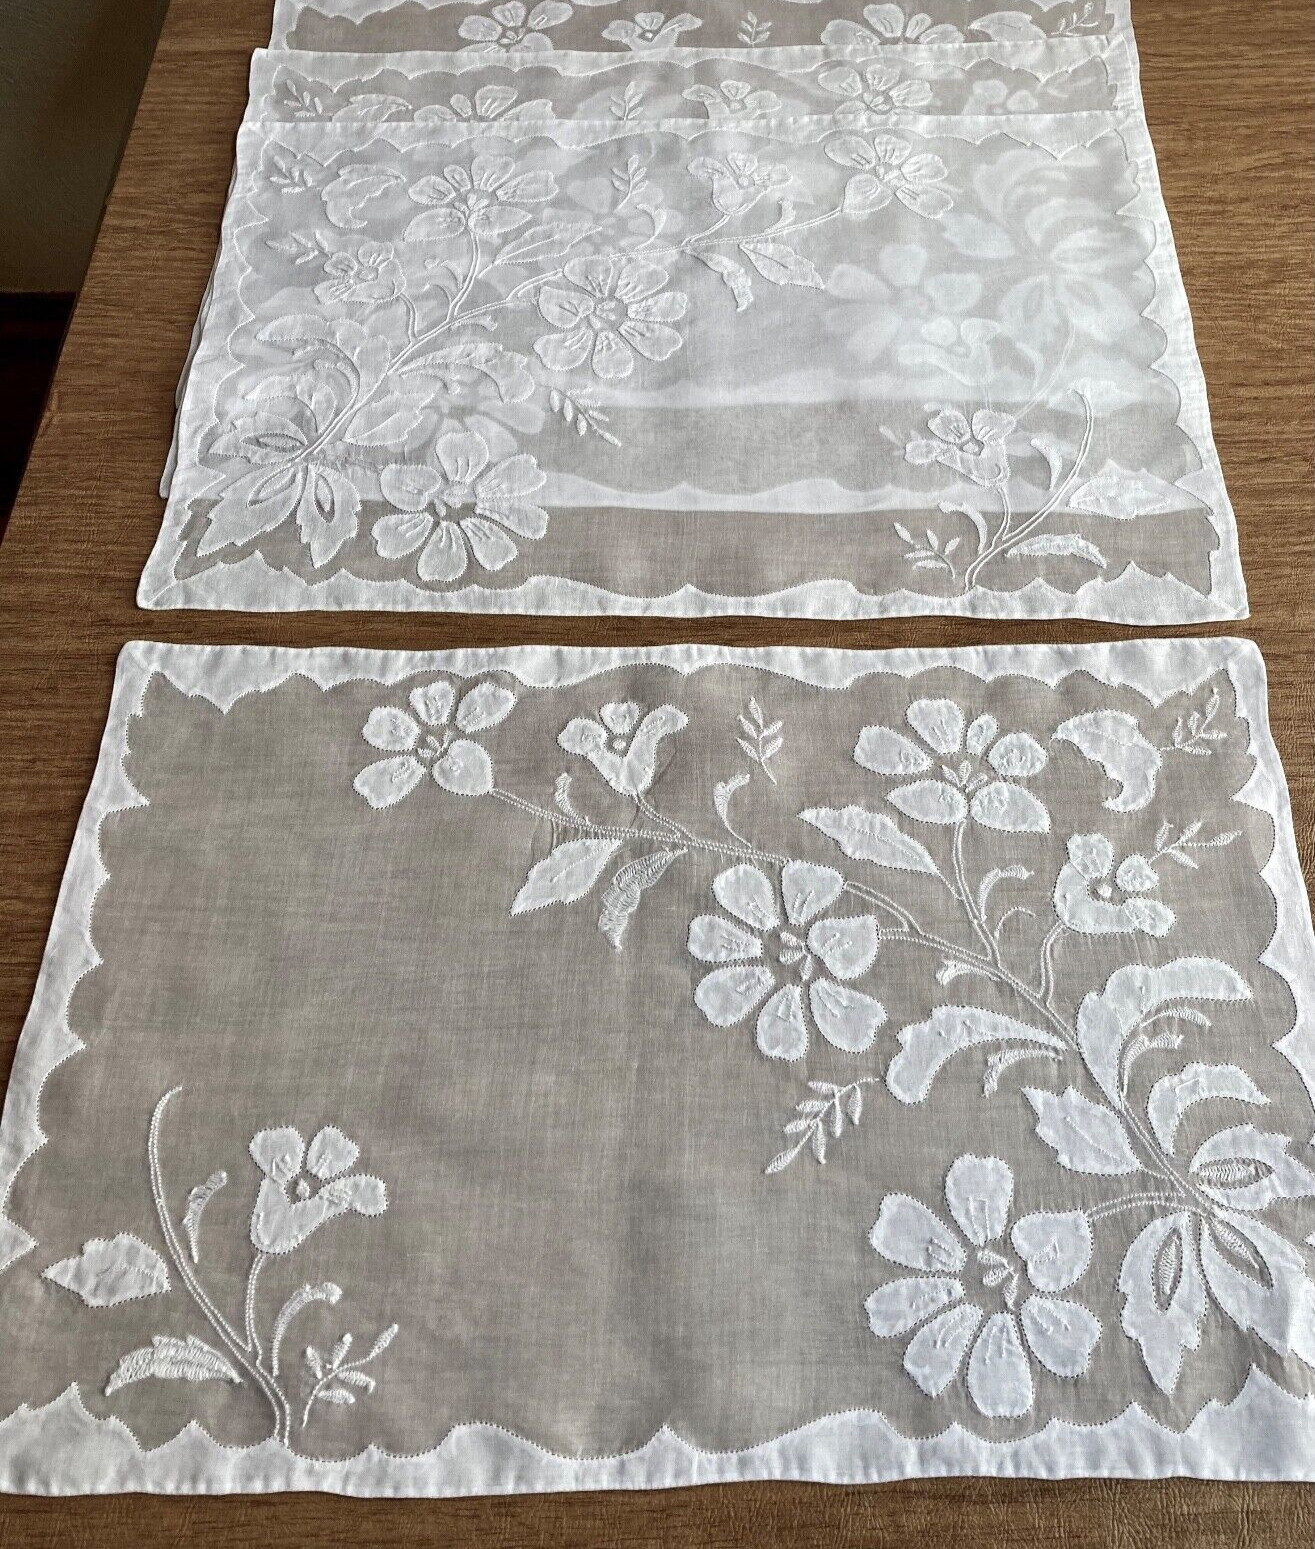 8 Vintage Antique White ORGANDY PLACEMATS with Graceful Floral Design